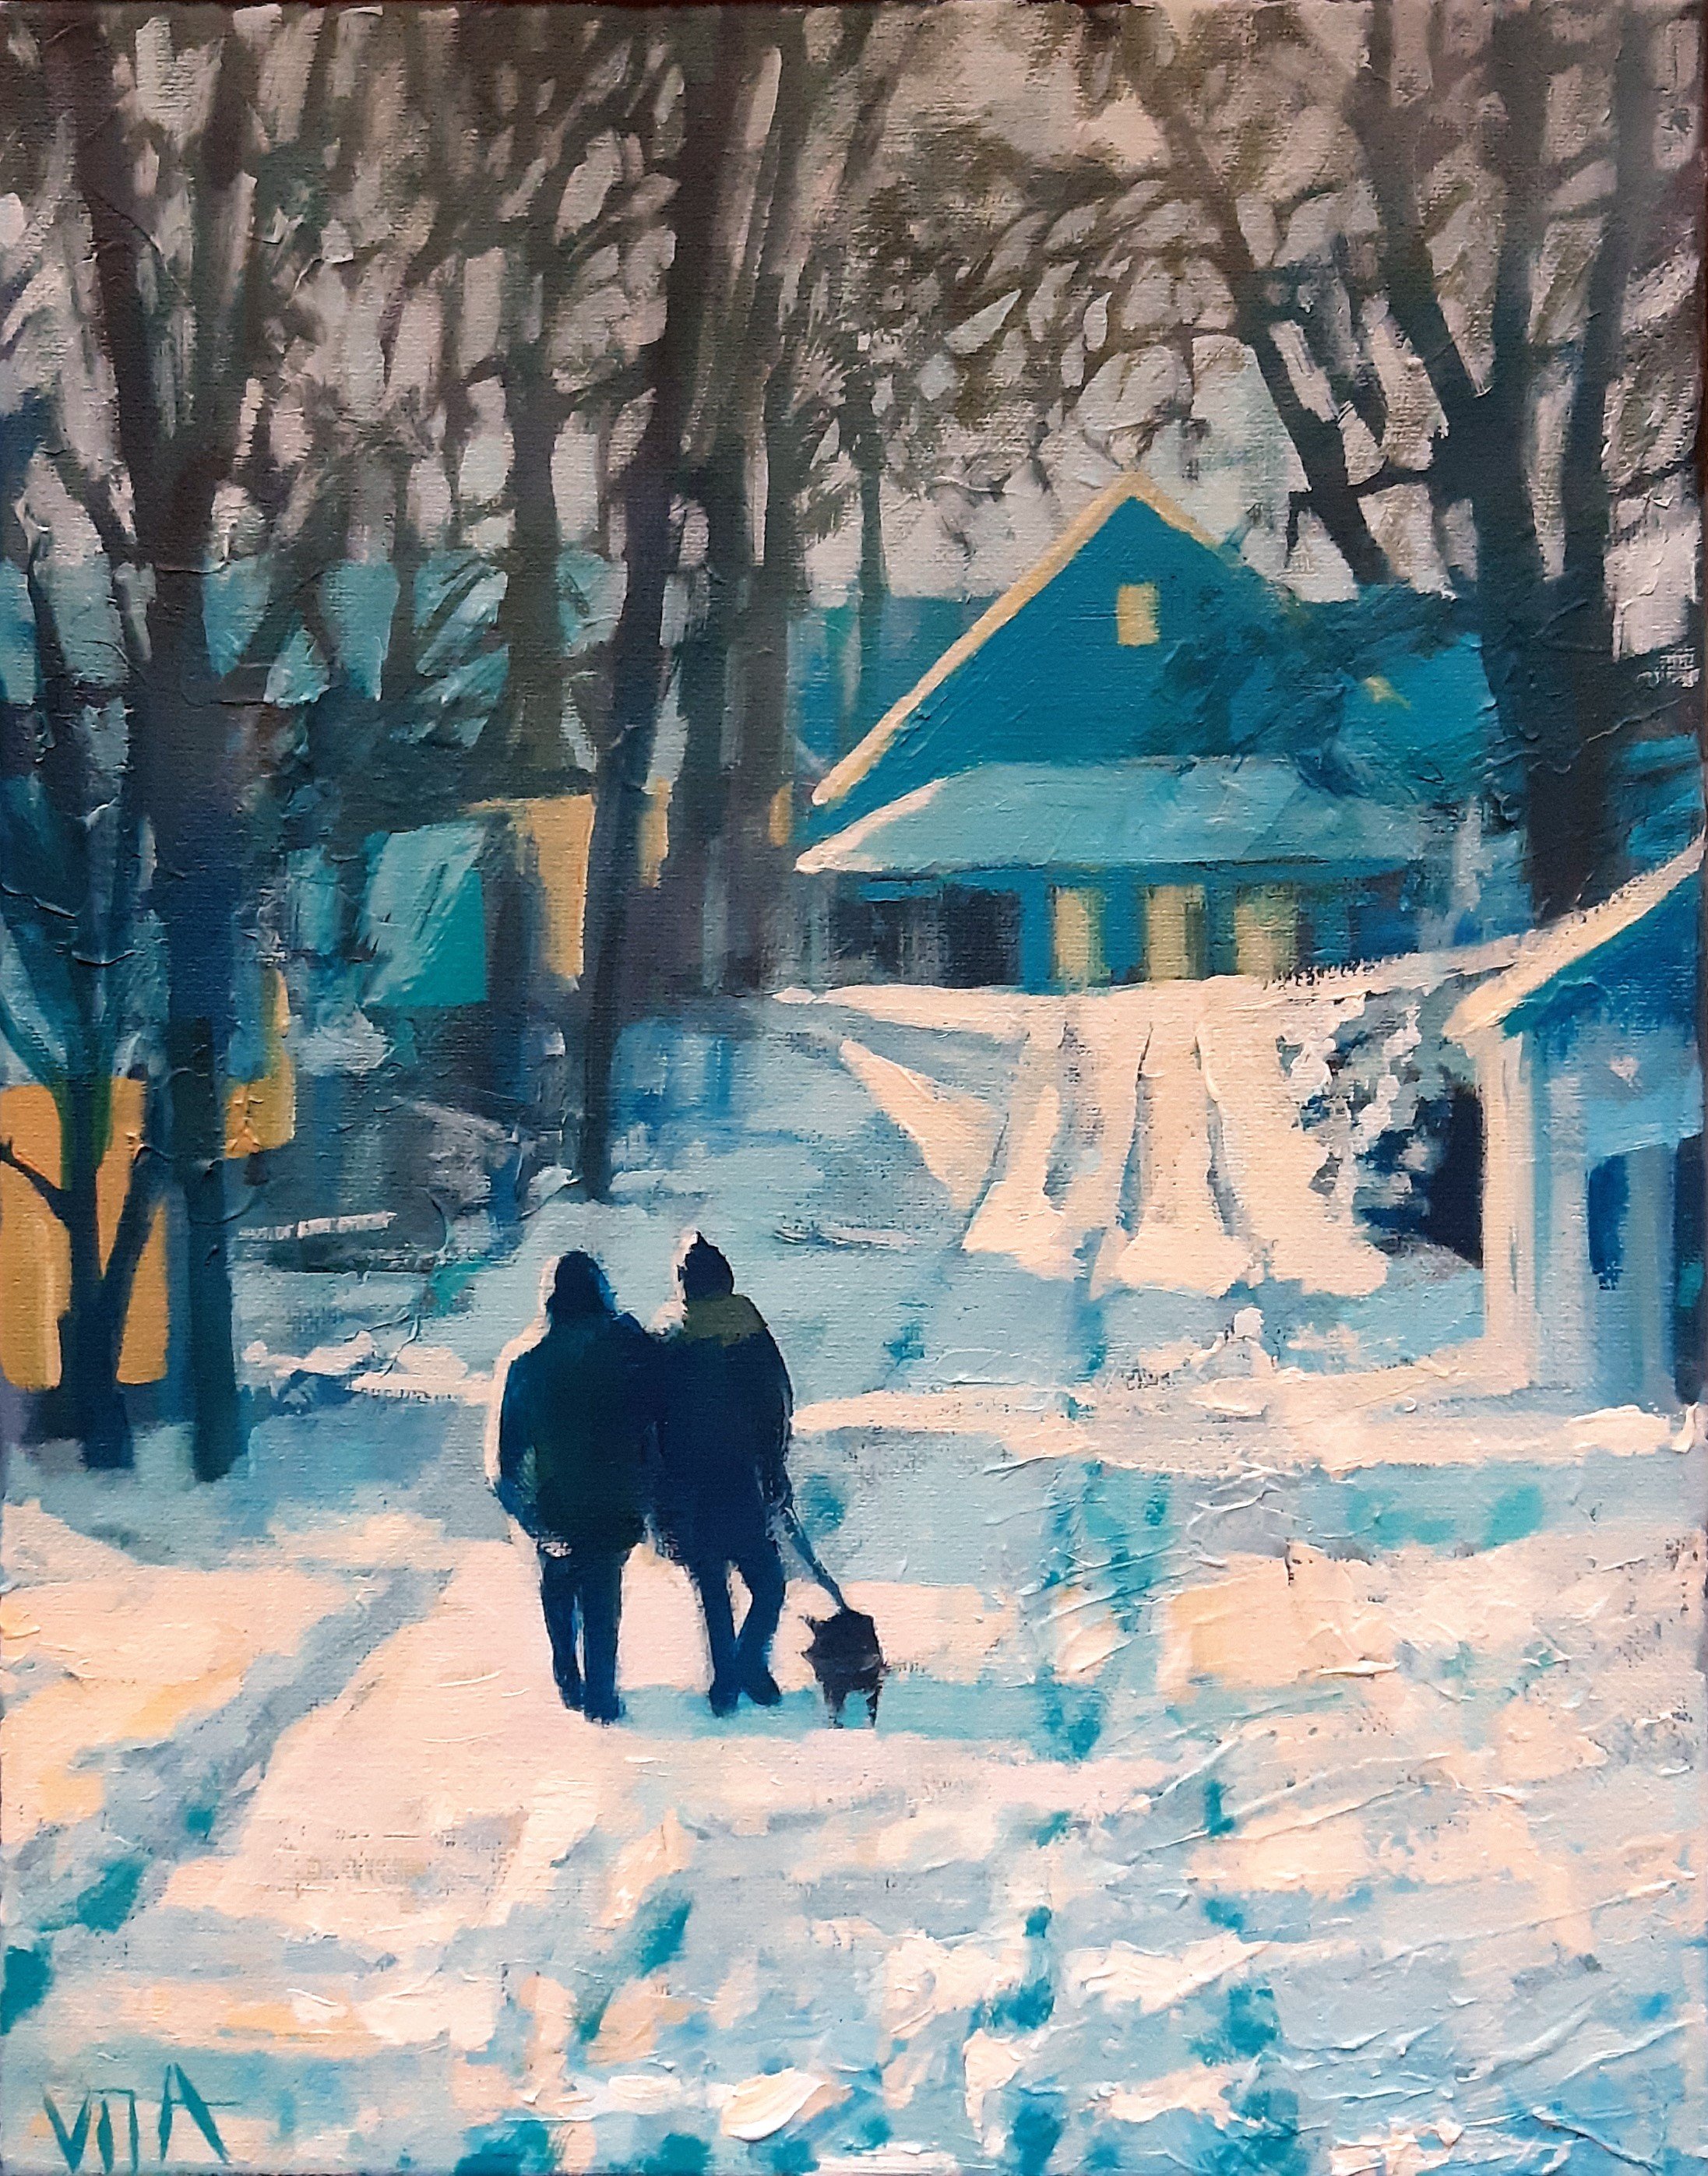 SOLD, Sisters in the Snow Painting, Acrylic on Canvas, Copyright 2021 Hirschten